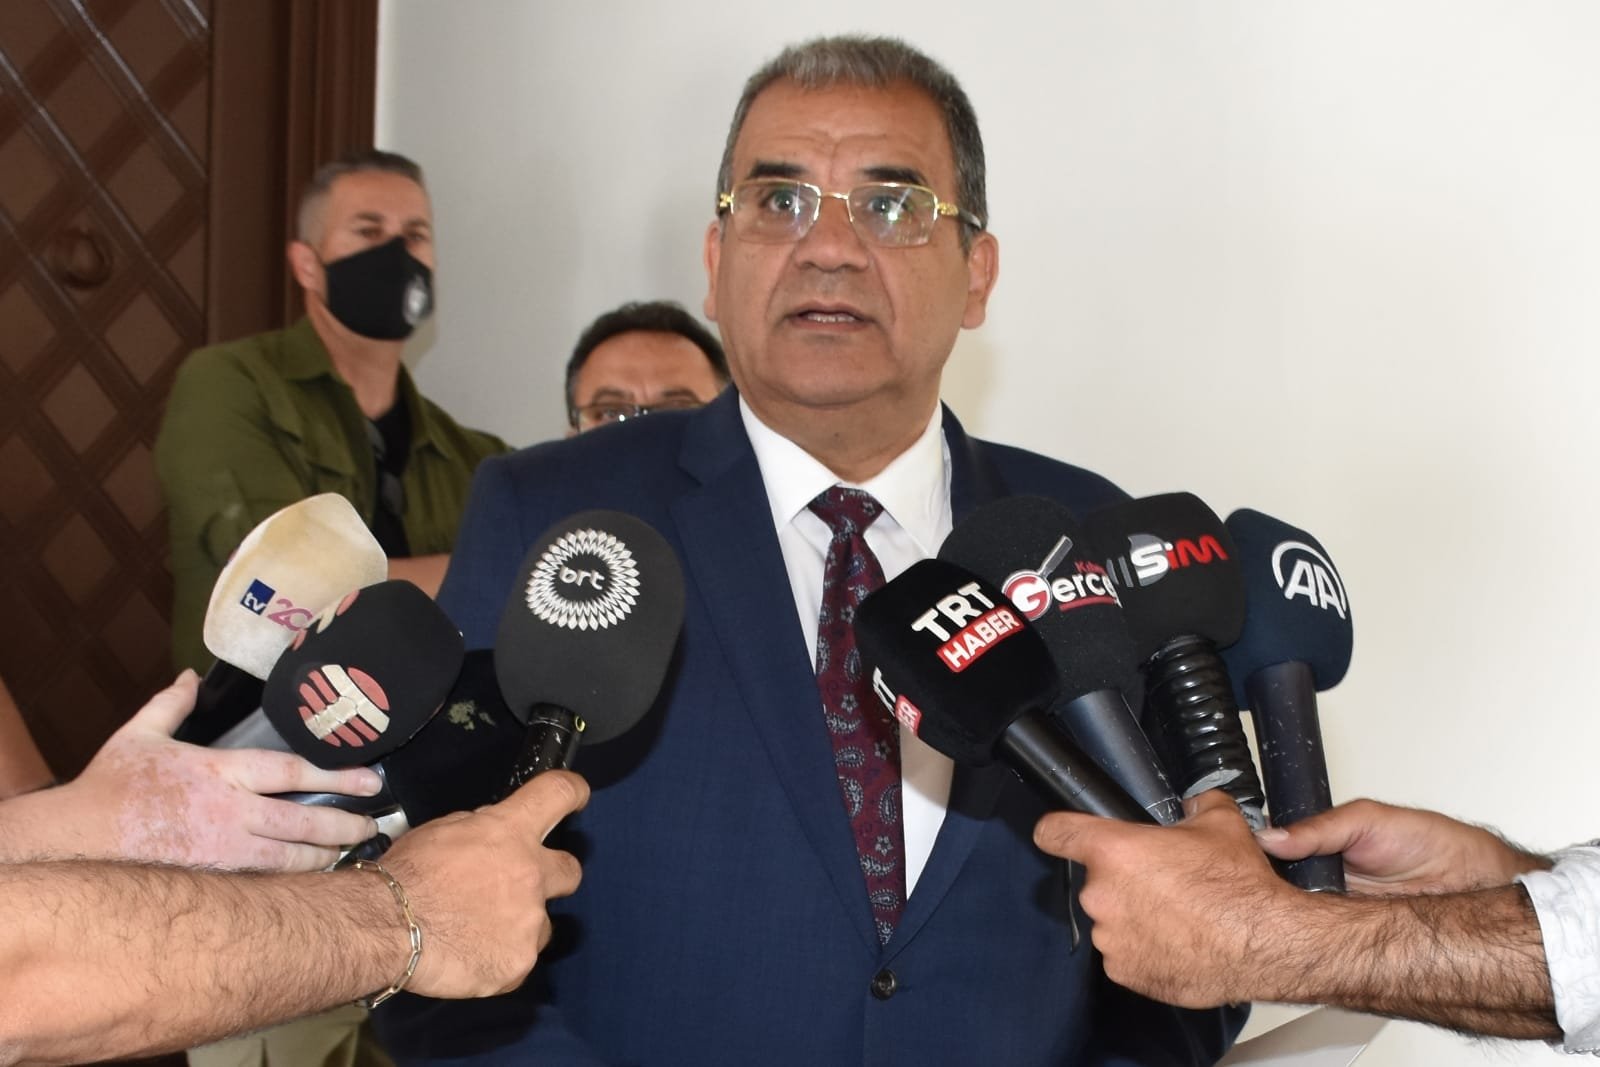 UBP Chairperson Faiz Sucuoğlu speaks to reporters after forming government in Lefkoşa, TRNC, April 25, 2022. (AA Photo)